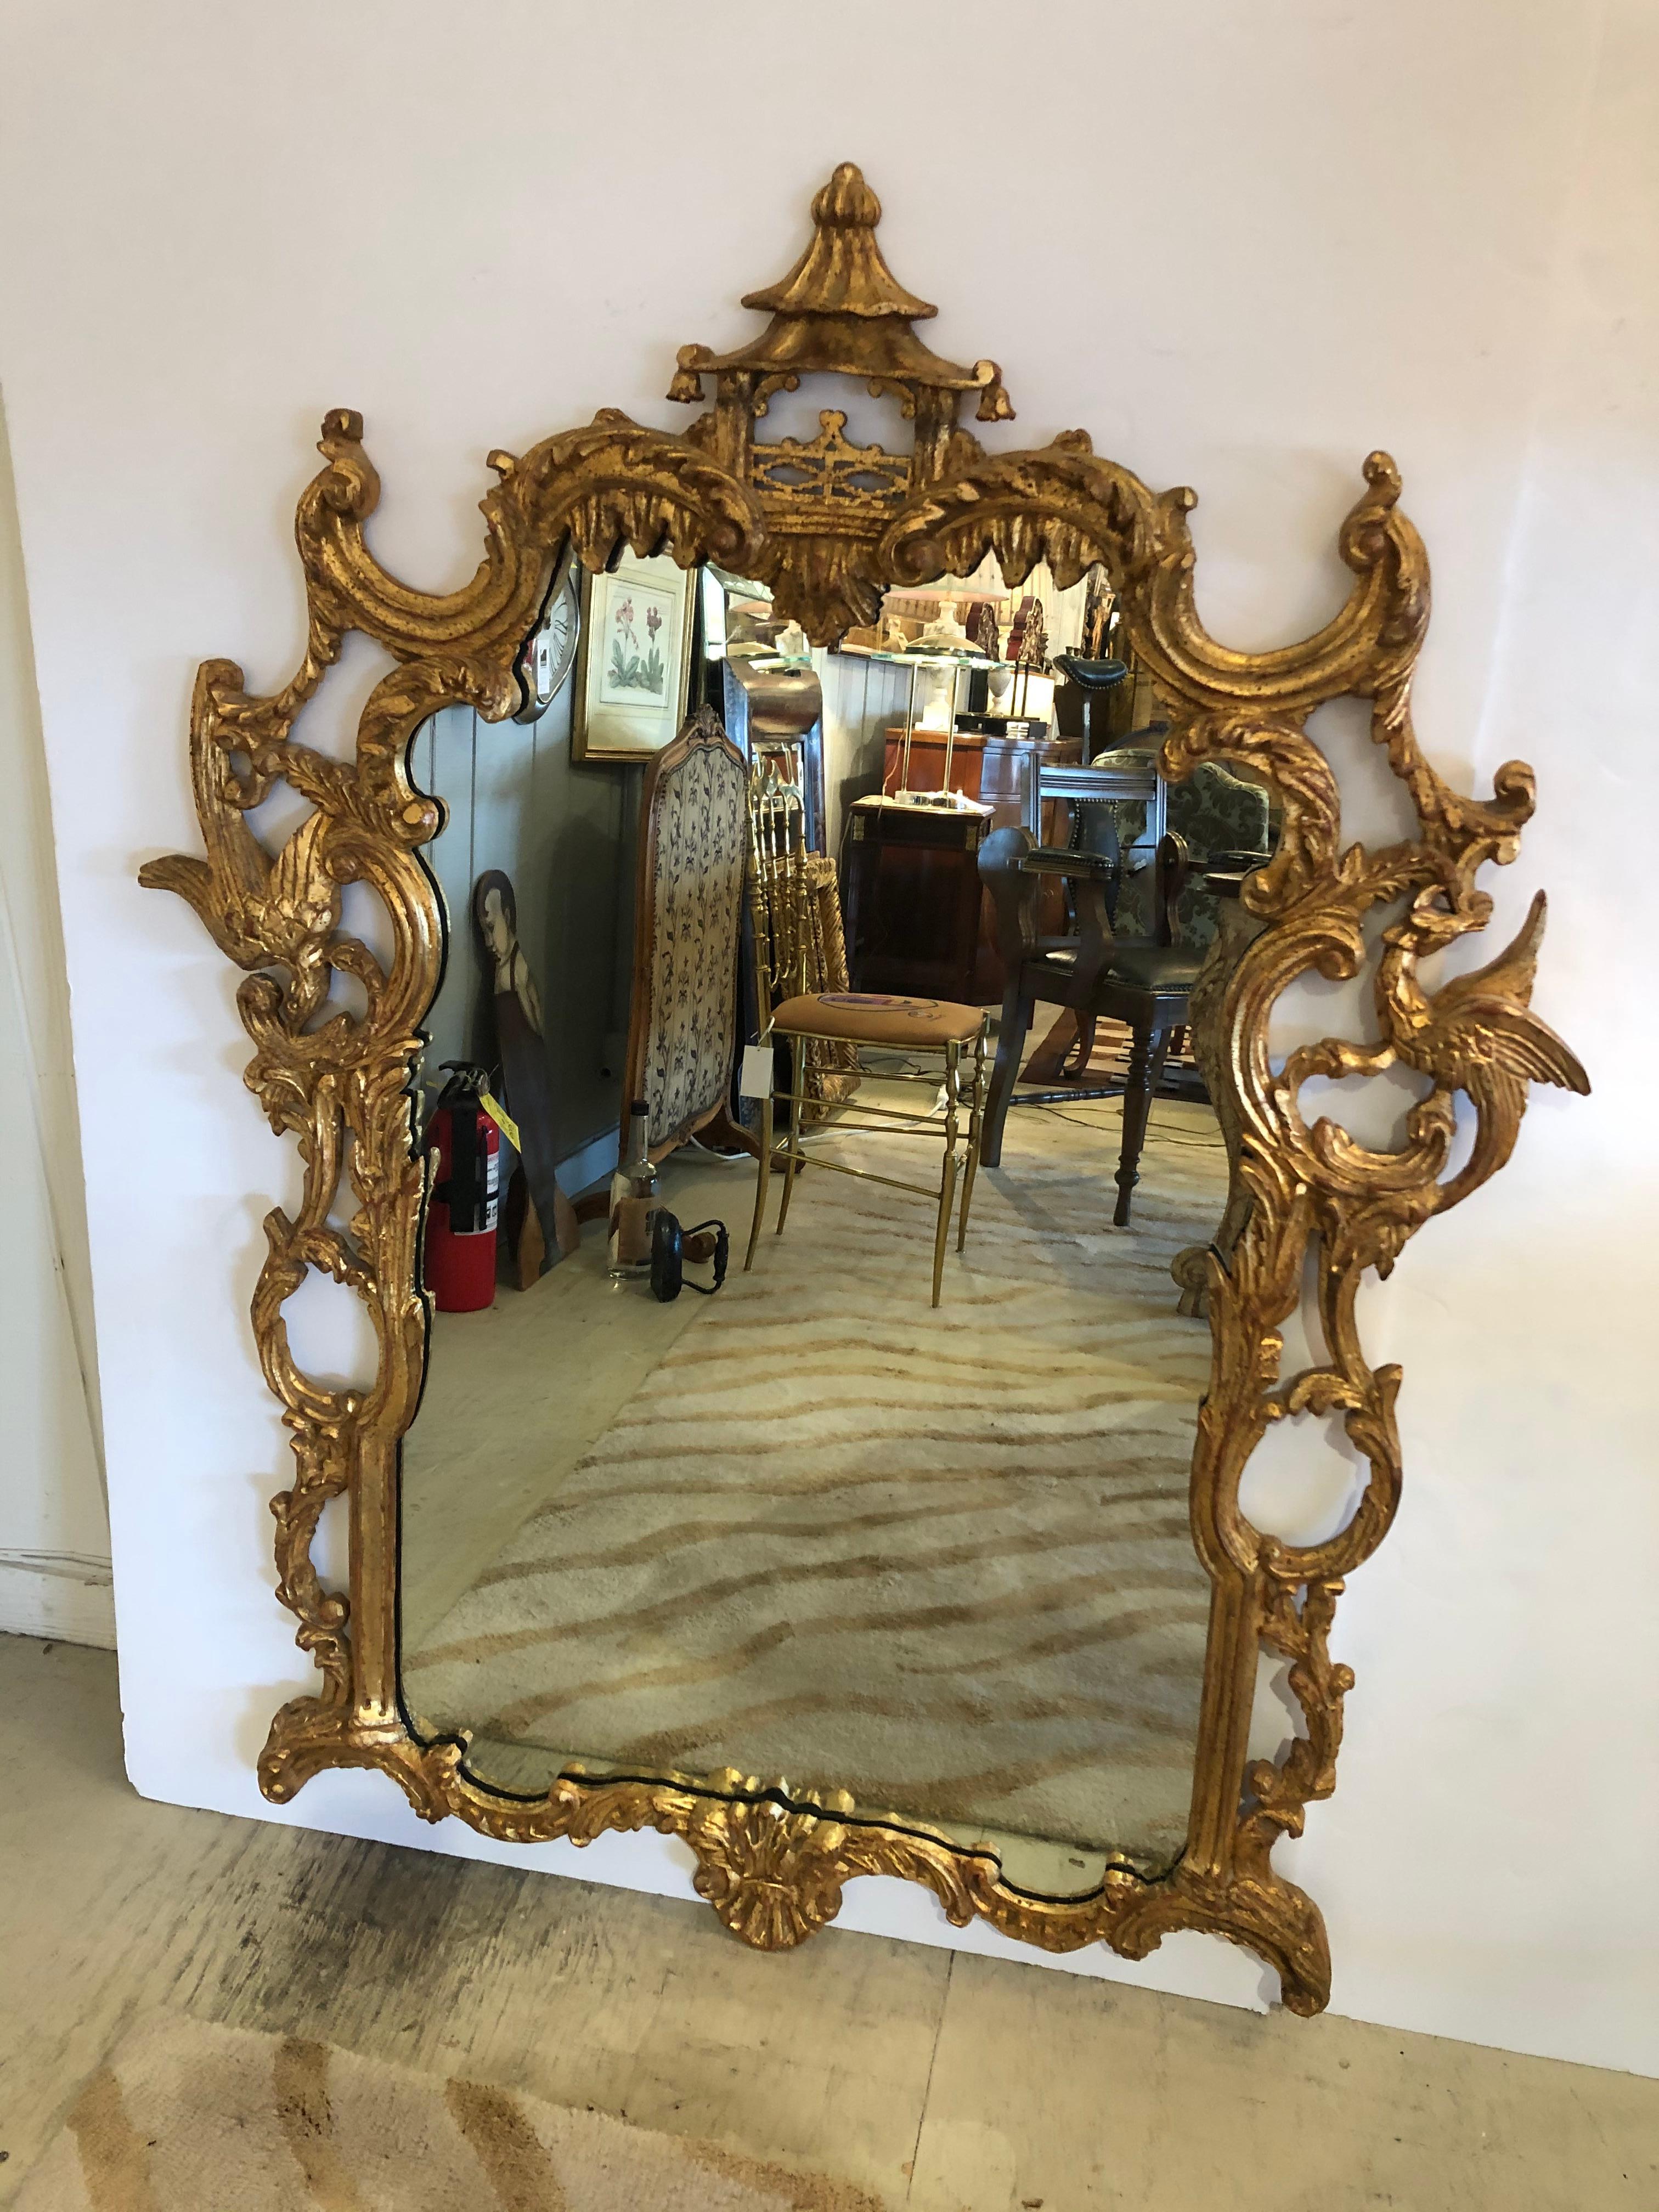 A spectacular large carved Italian giltwood Chinese Chippendale style mirror having pagoda at the top, curlicues and ornate birds and foliage around the frame with wonderful aged patina.